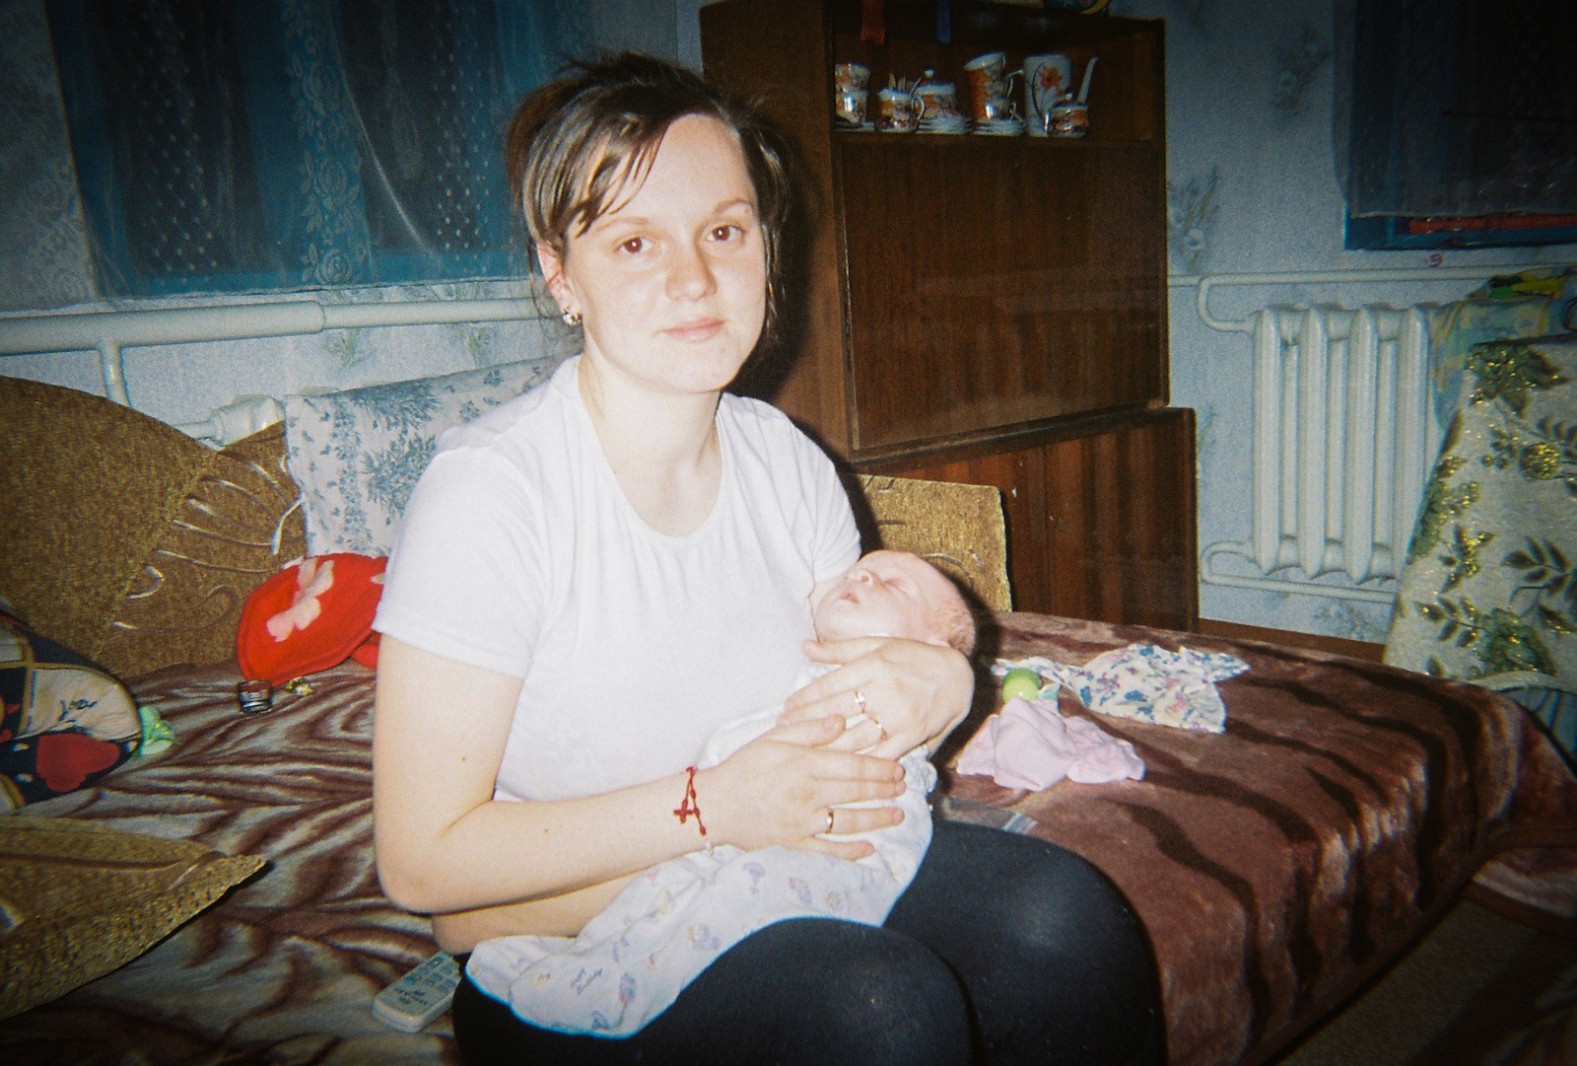 A mother and her newborn rest in their house in the Chernobyl region